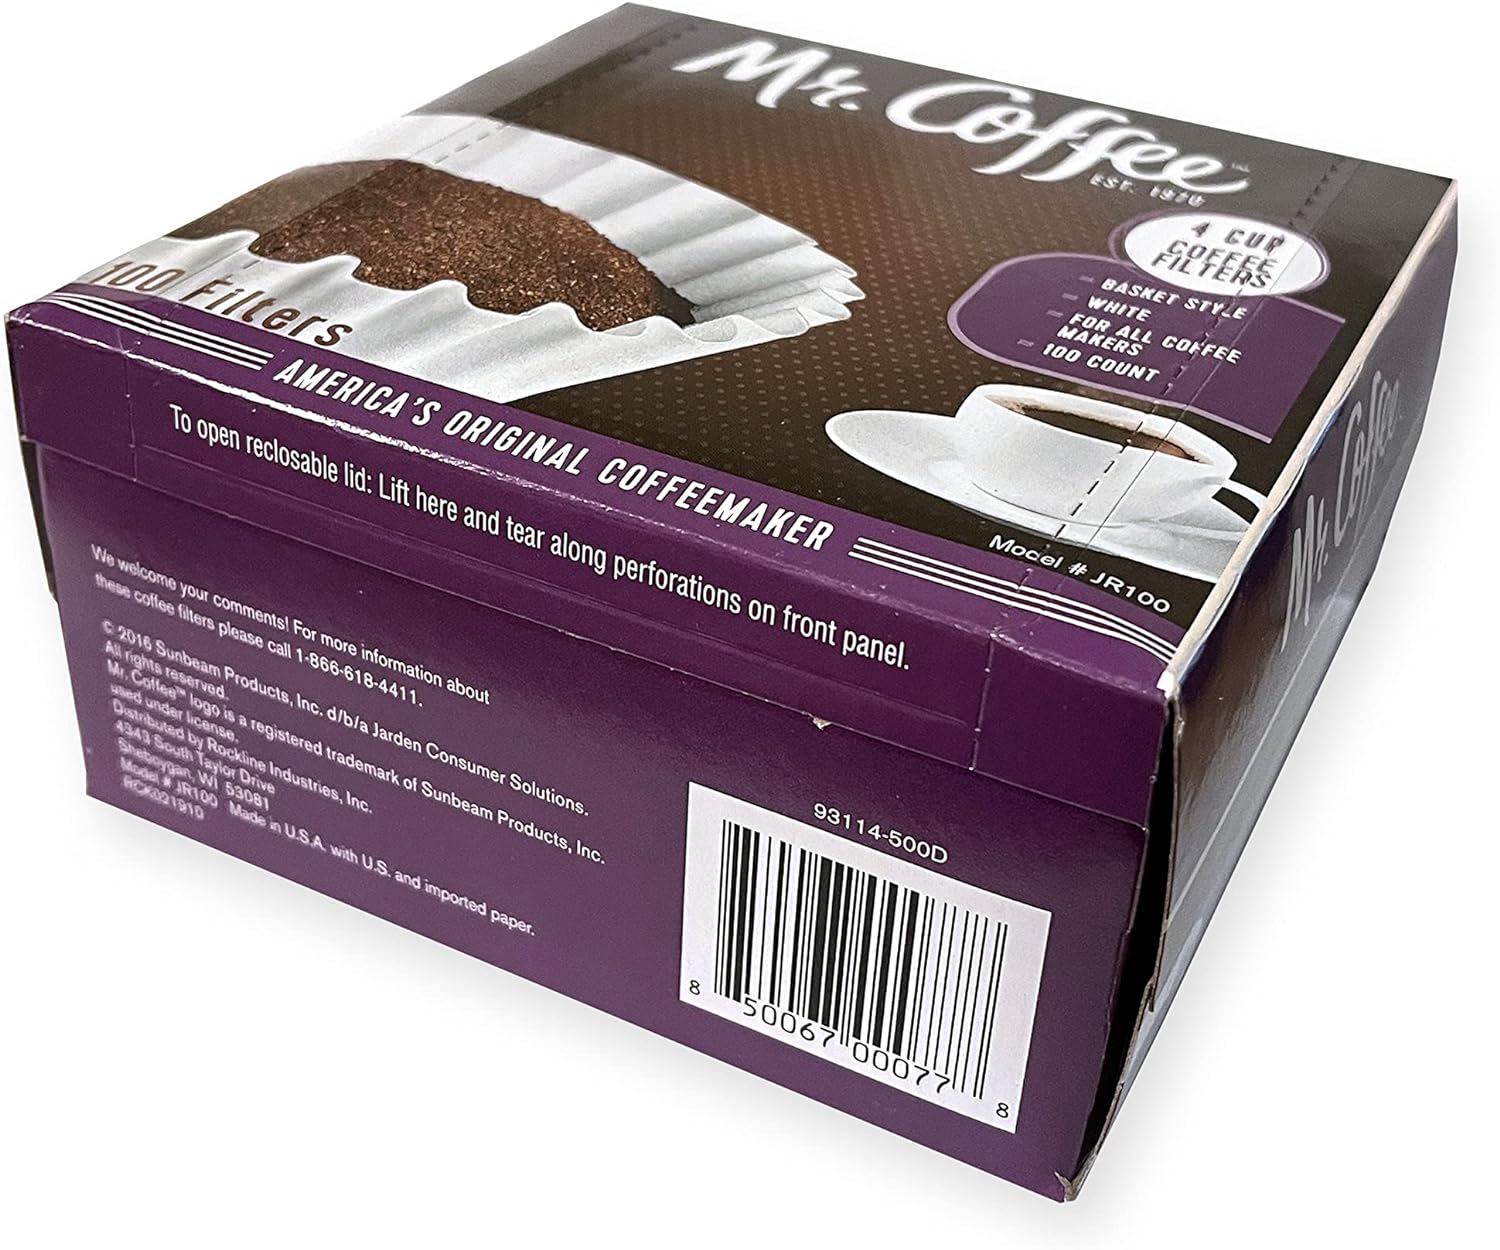 4-Cup Coffee Filters, 100-Count